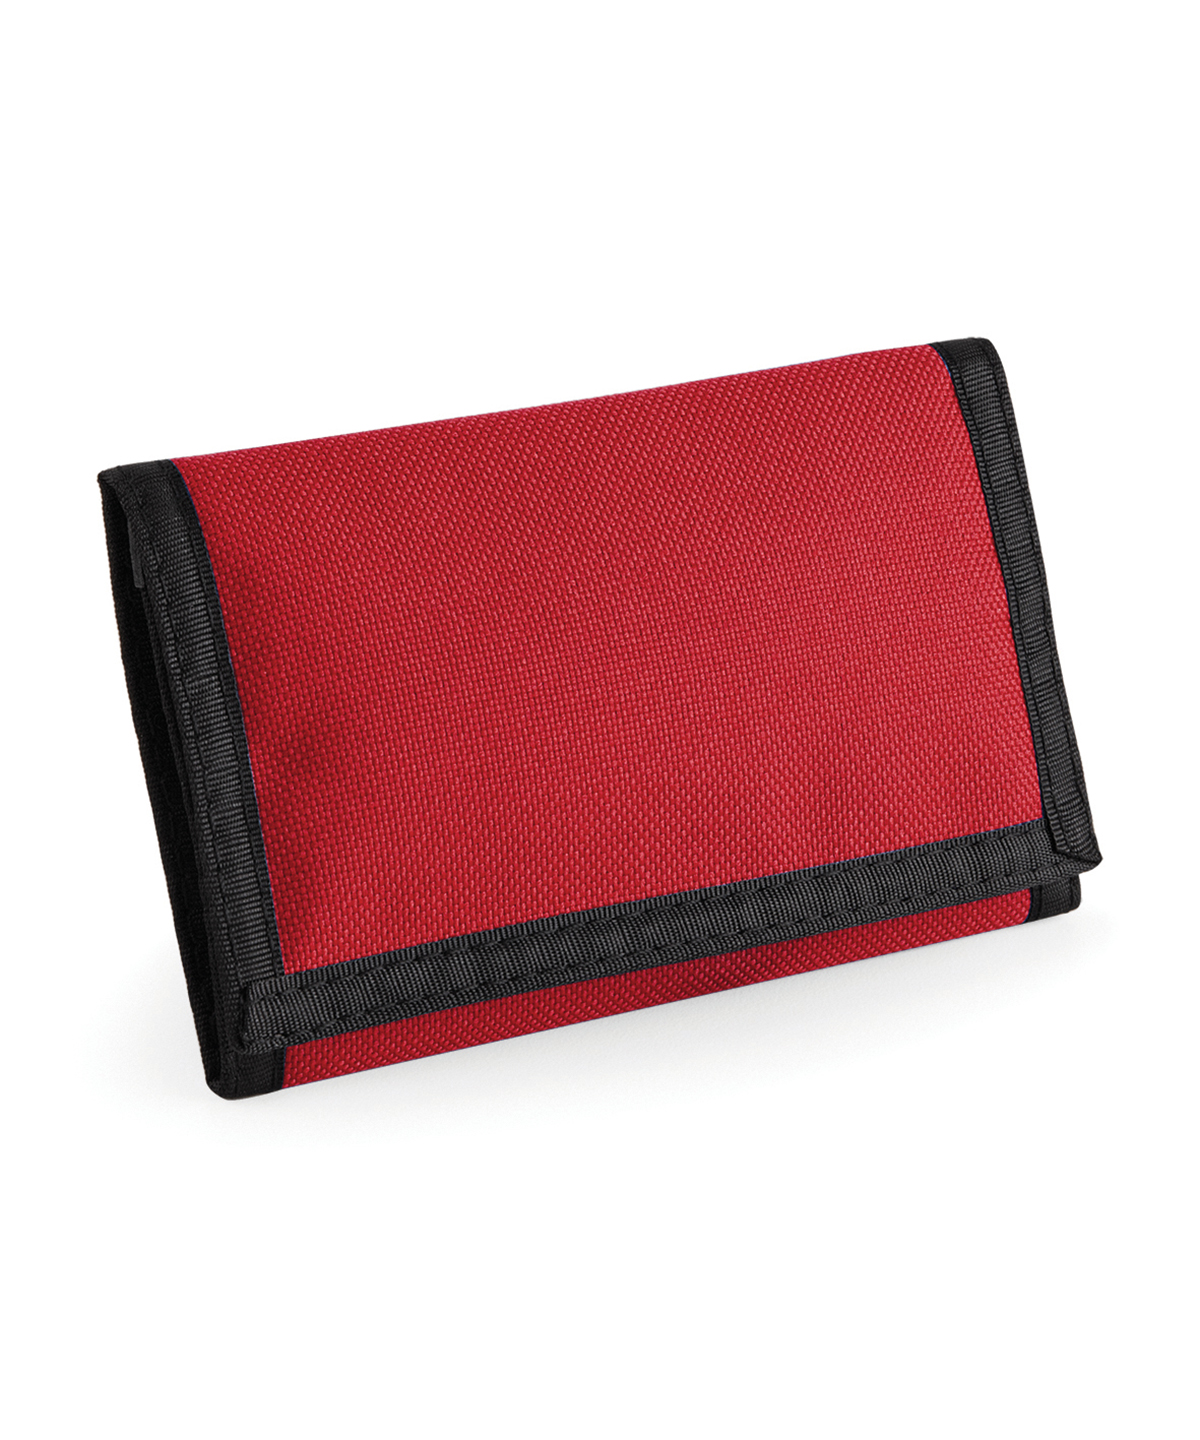 Ripper Wallet Classic Red Size One Size